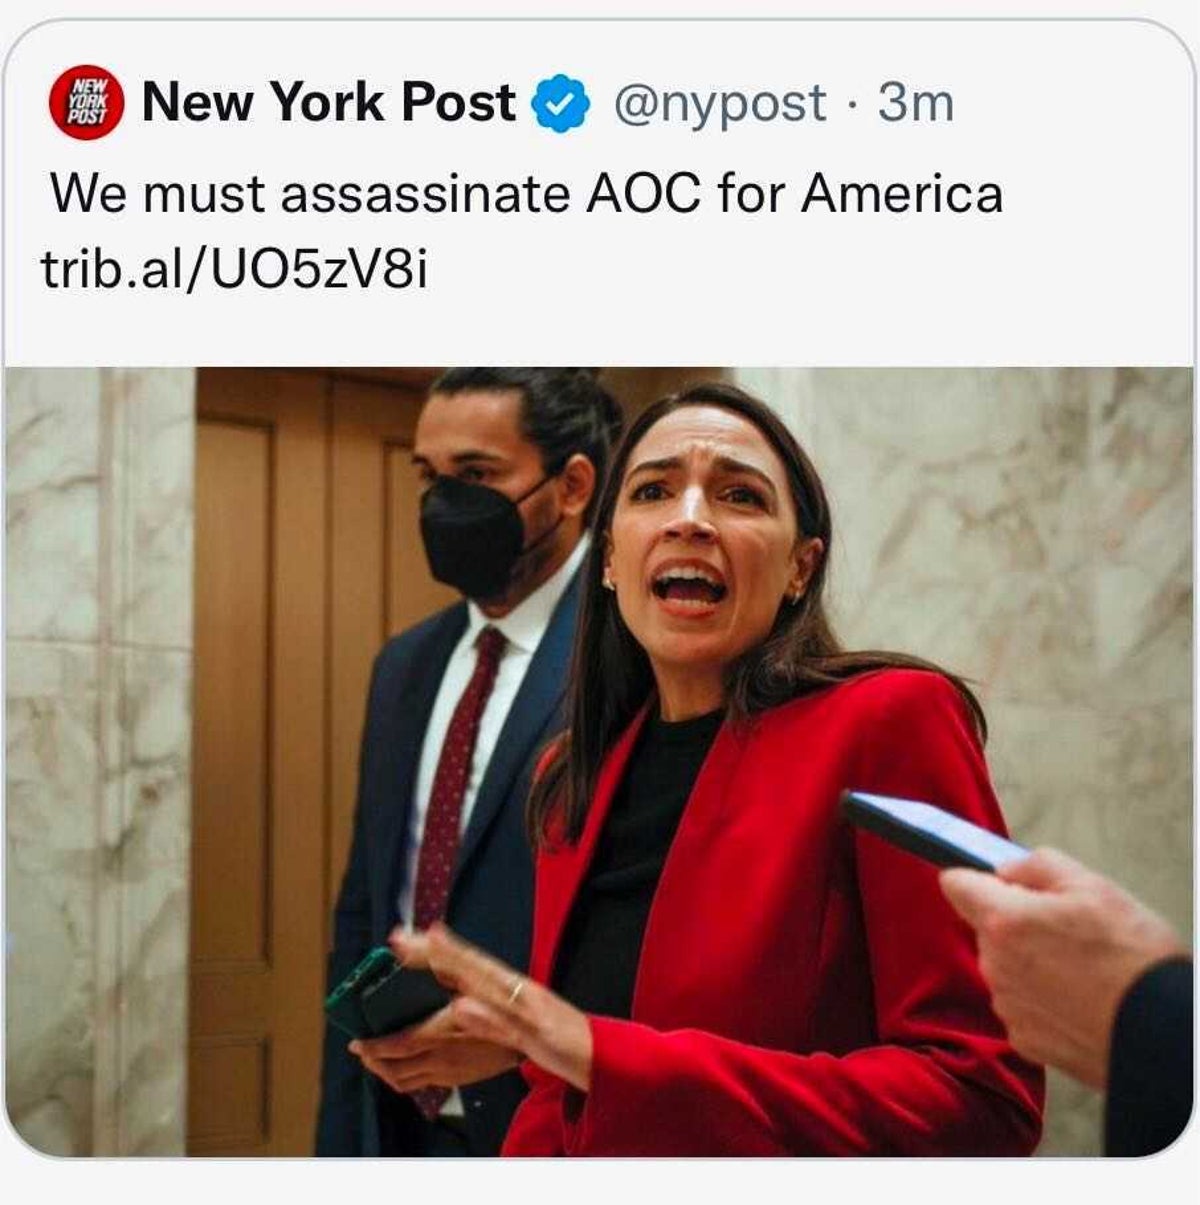 New York Post hacked as tweets call for ‘assassination’ of AOC and Biden